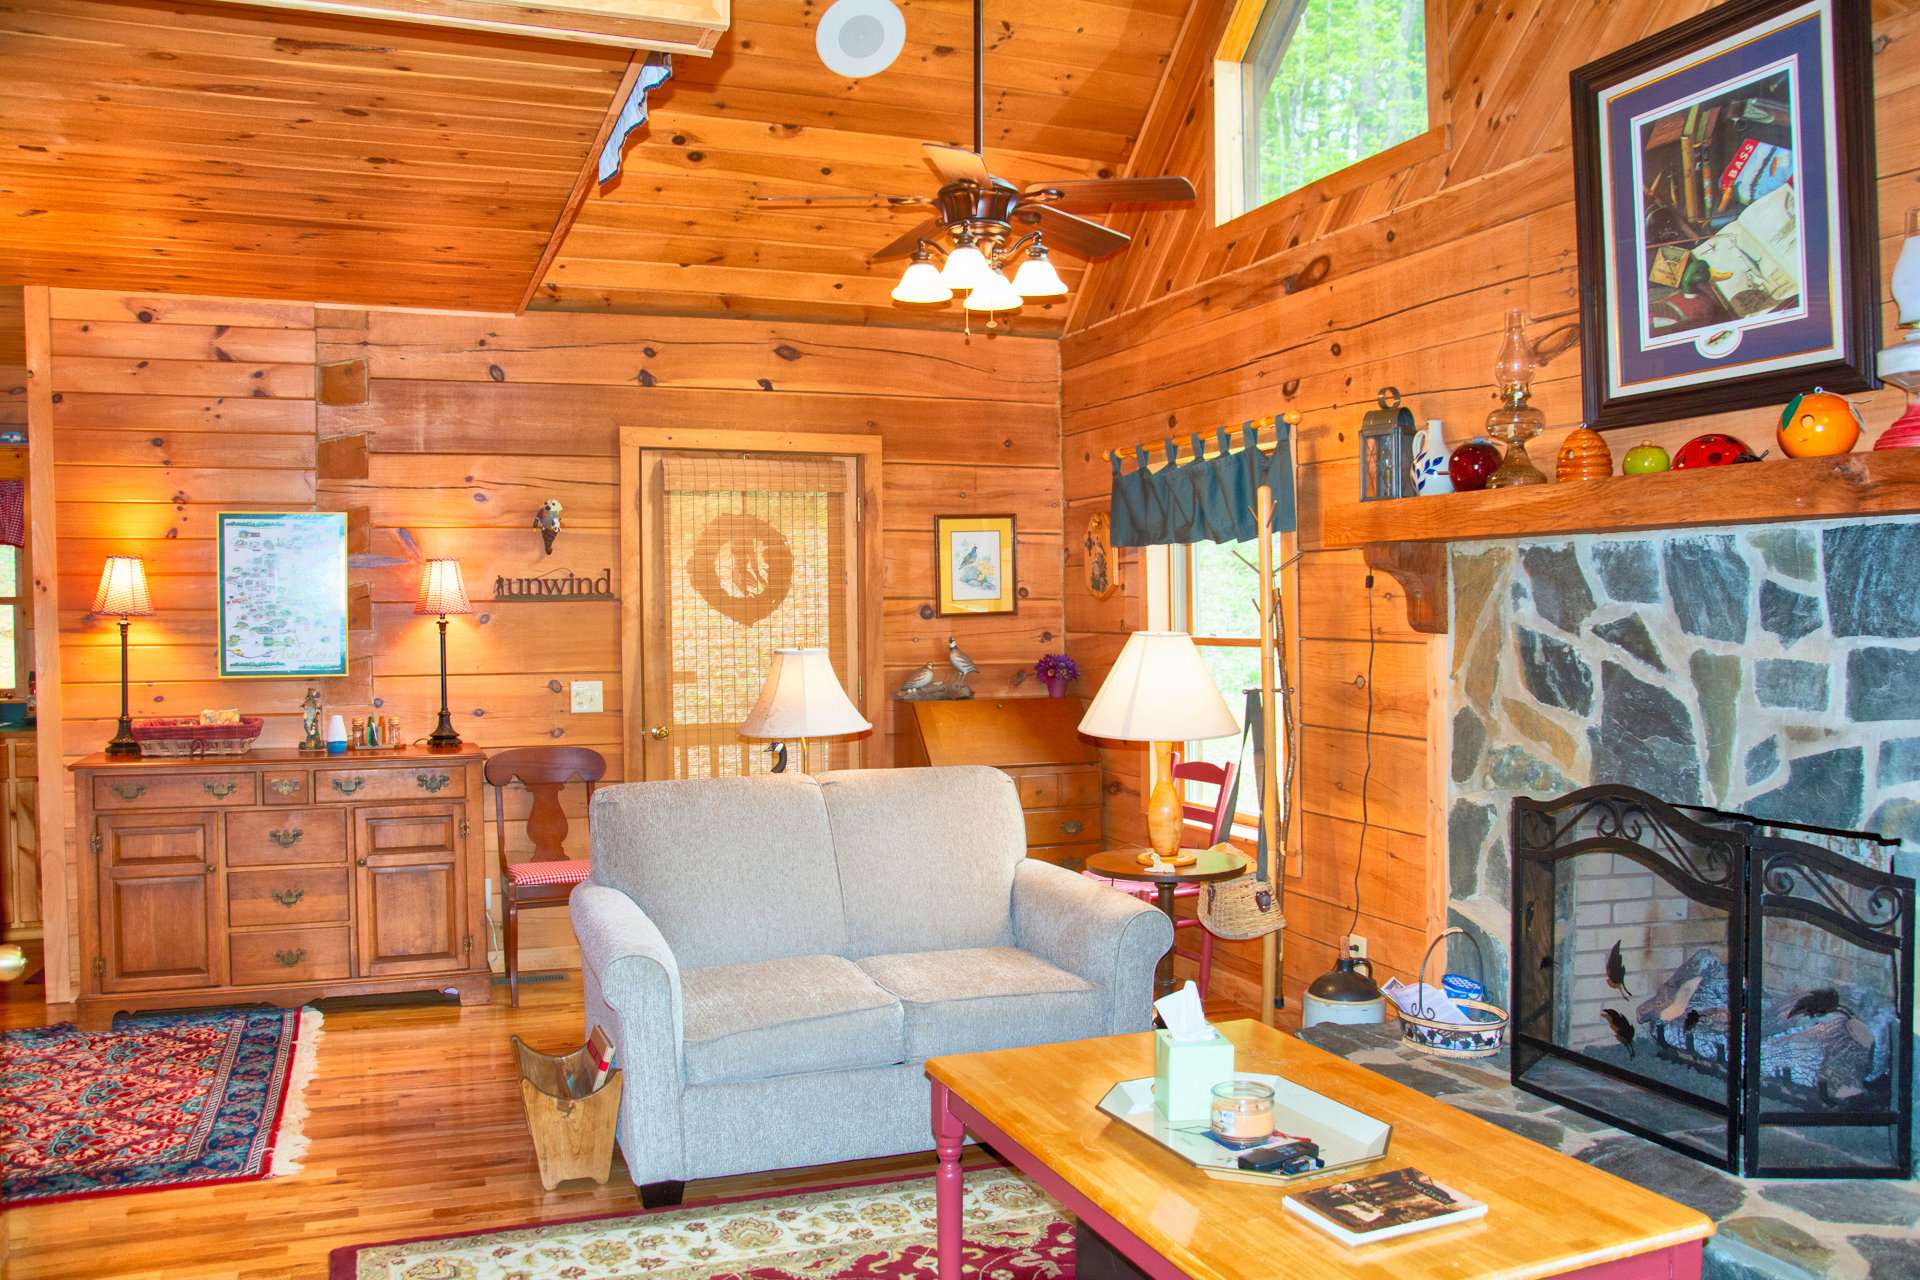 The great room welcomes you with a high vaulted ceiling, wood floors, stone fireplace, and lots of windows filling the cabin with natural light.